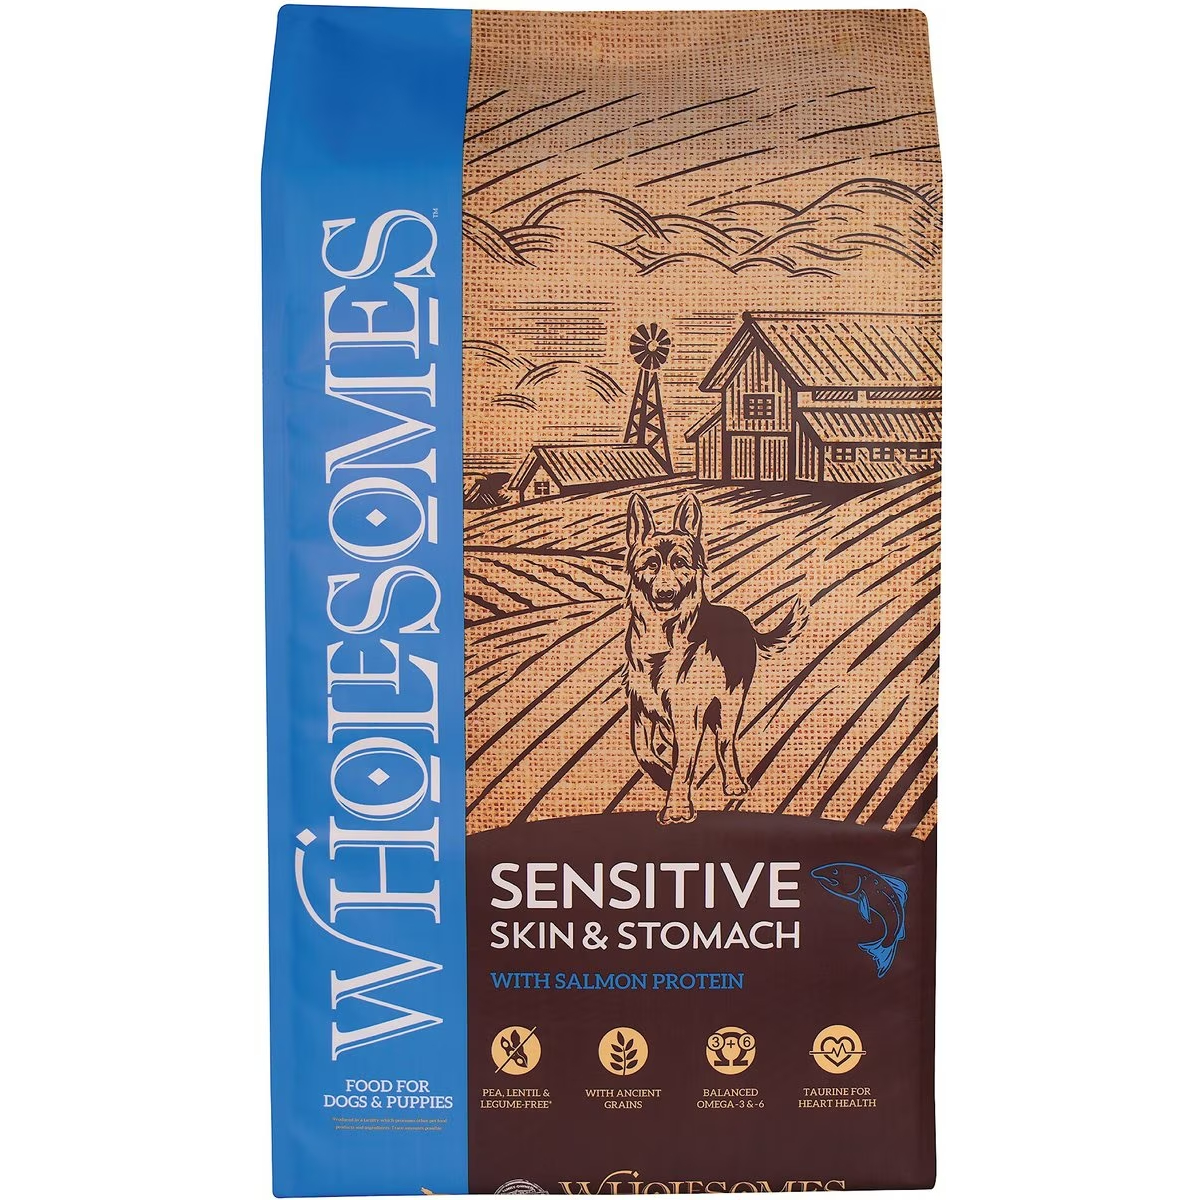 New Project Wholesomes Sensitive Skin & Stomach with Salmon Protein Dry Dog Food